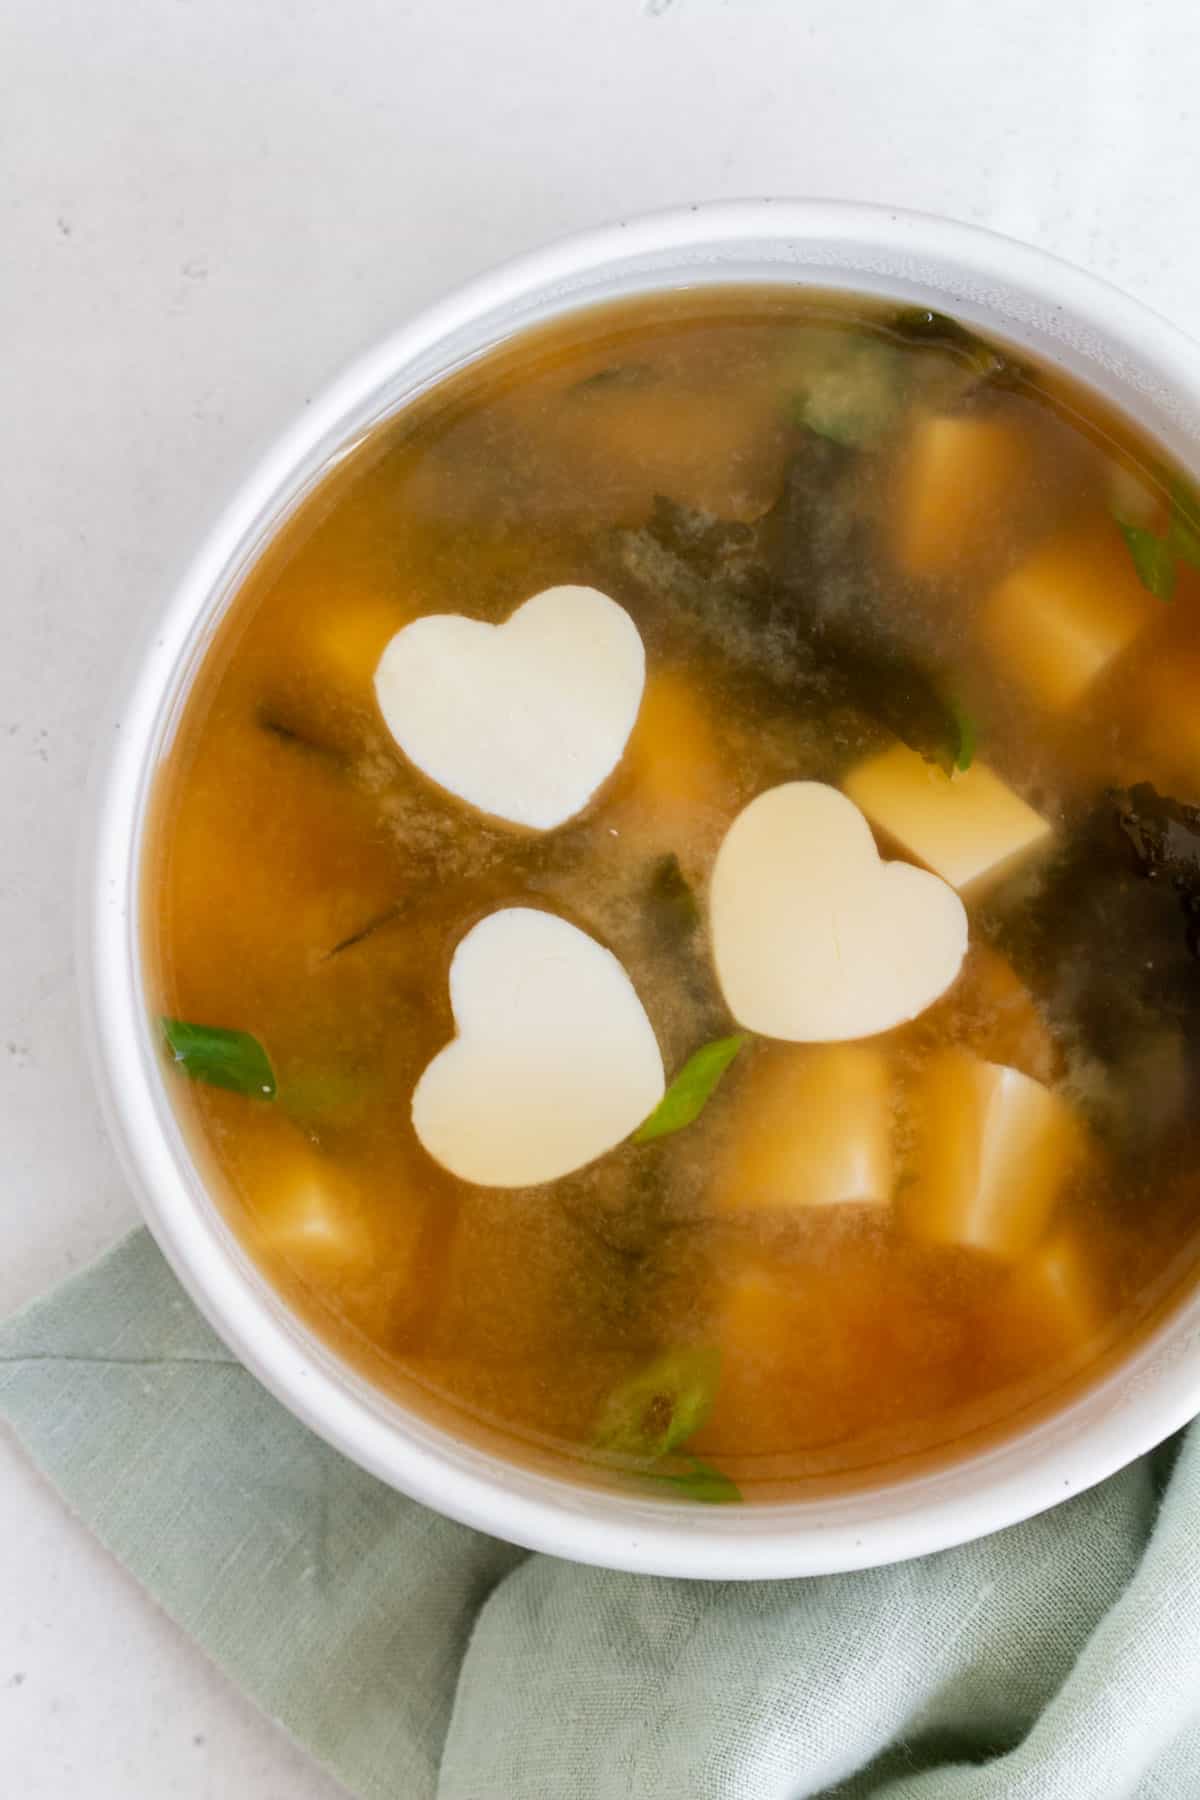 Overhead view of miso soup with pieces of tofu floating.